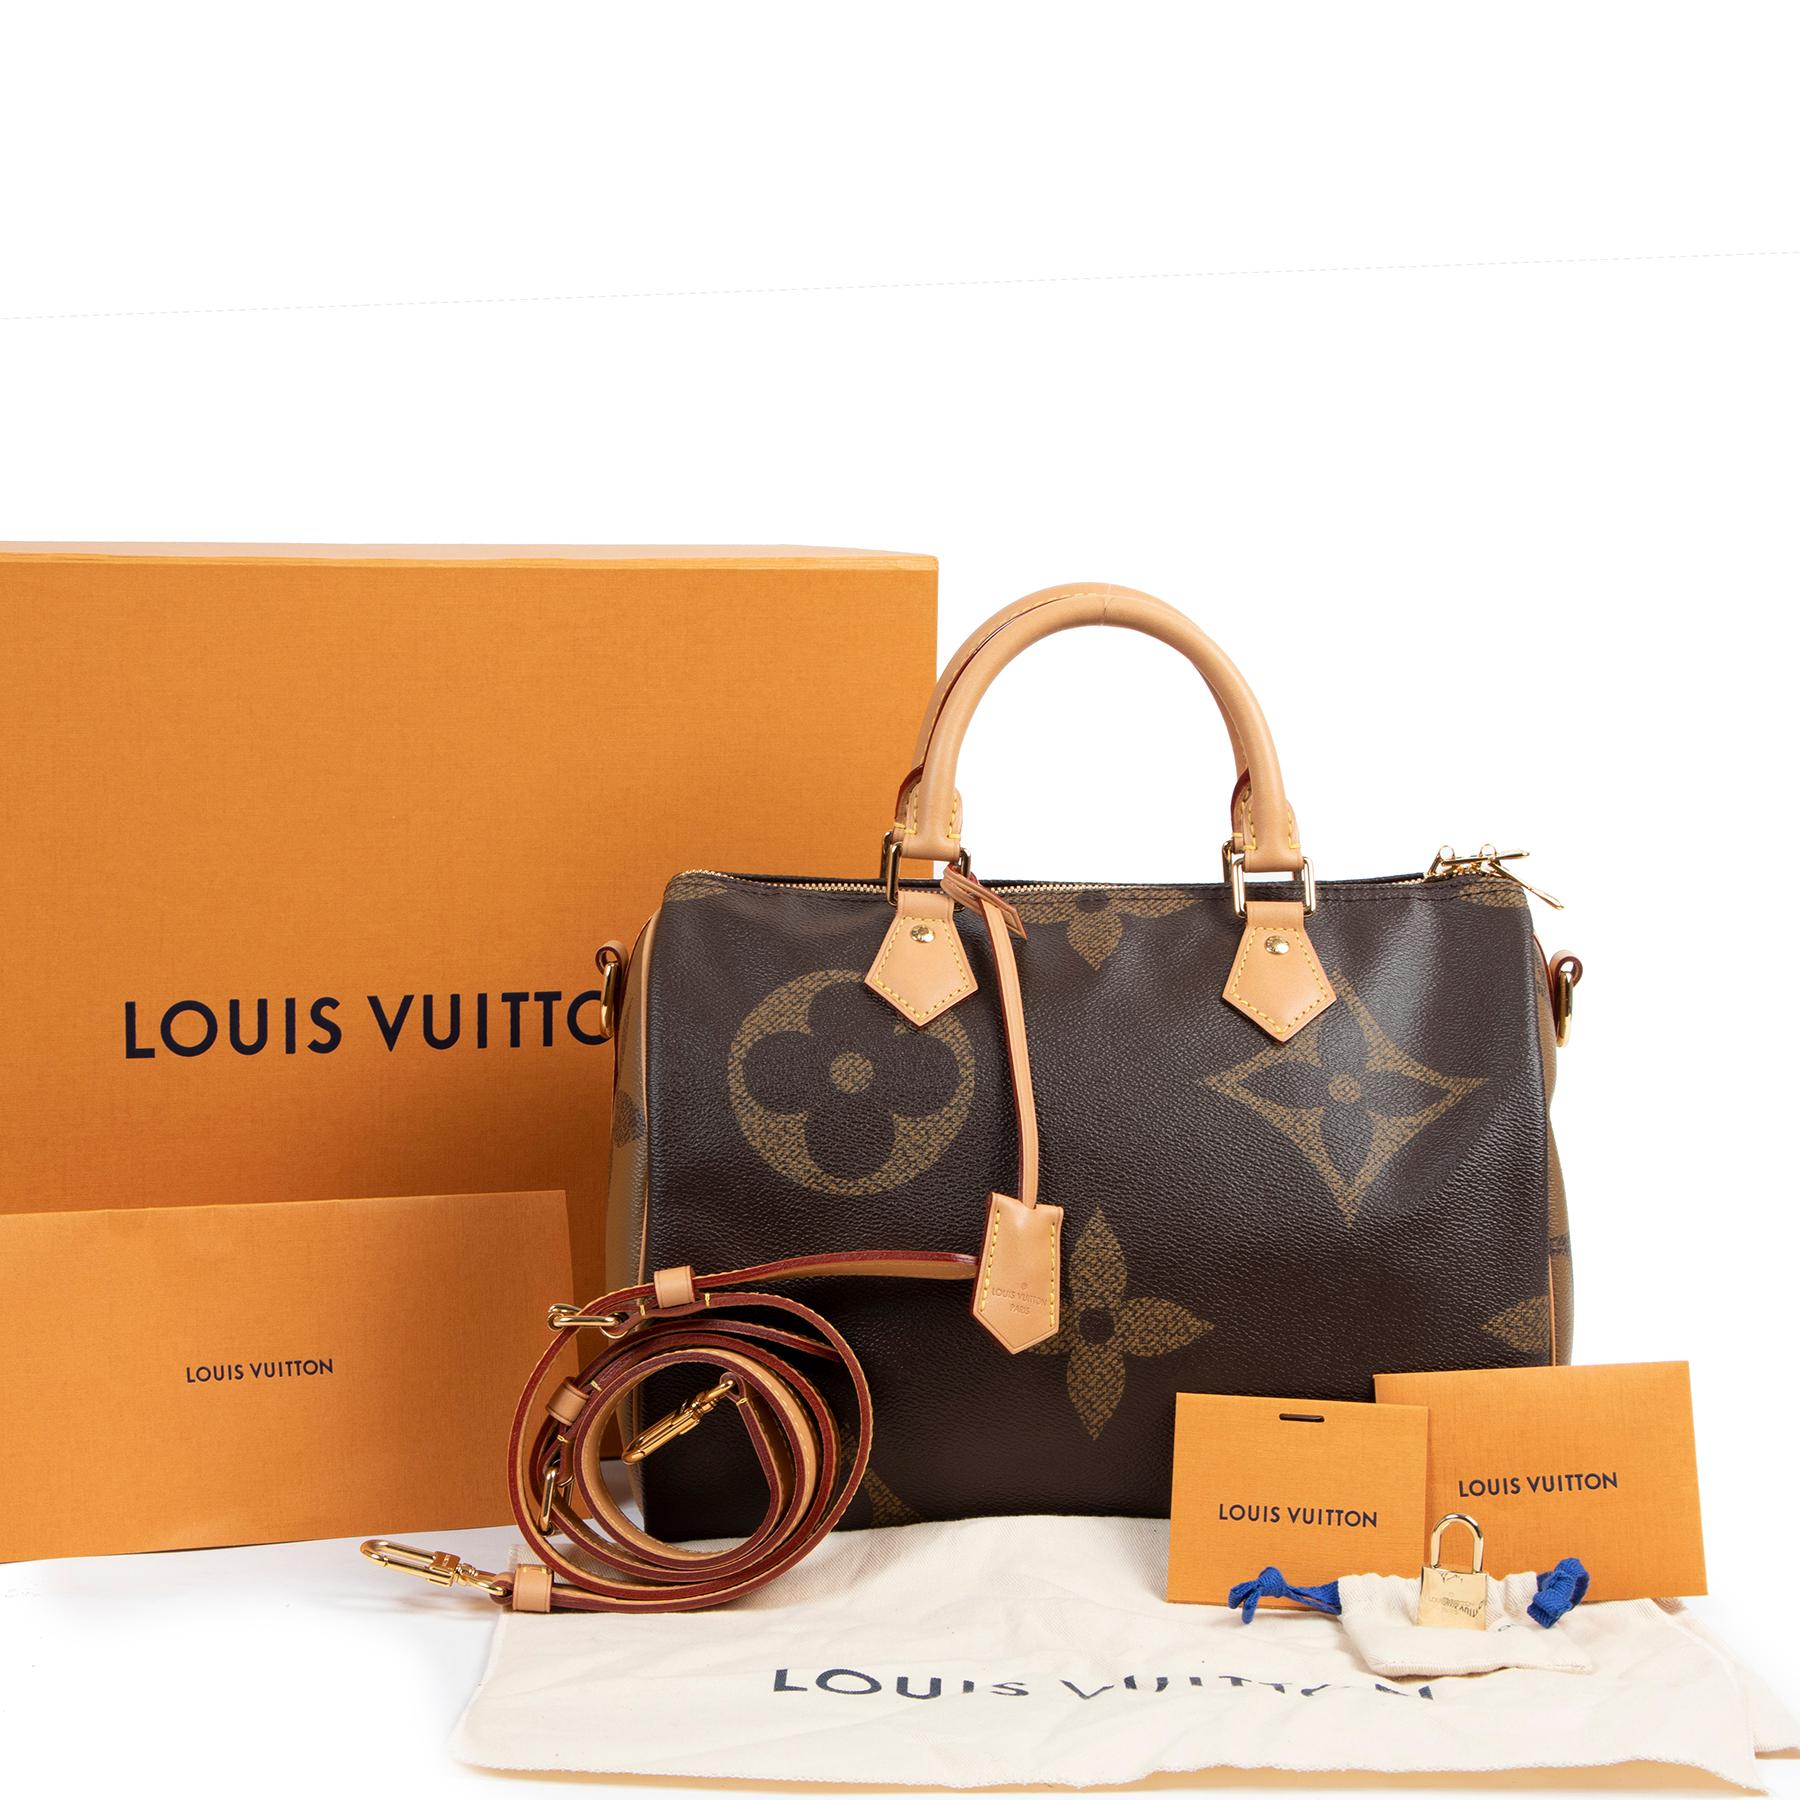 BRAND NEW

Louis Vuitton Speedy Bandoulière 30 Giant Monogram Bag 

The ever-stylish Speedy handbag shows a new face for Pre-Fall 2019. This model features the oversized Monogram Giant motif paired with Monogram Reverse, two fresh iterations of the